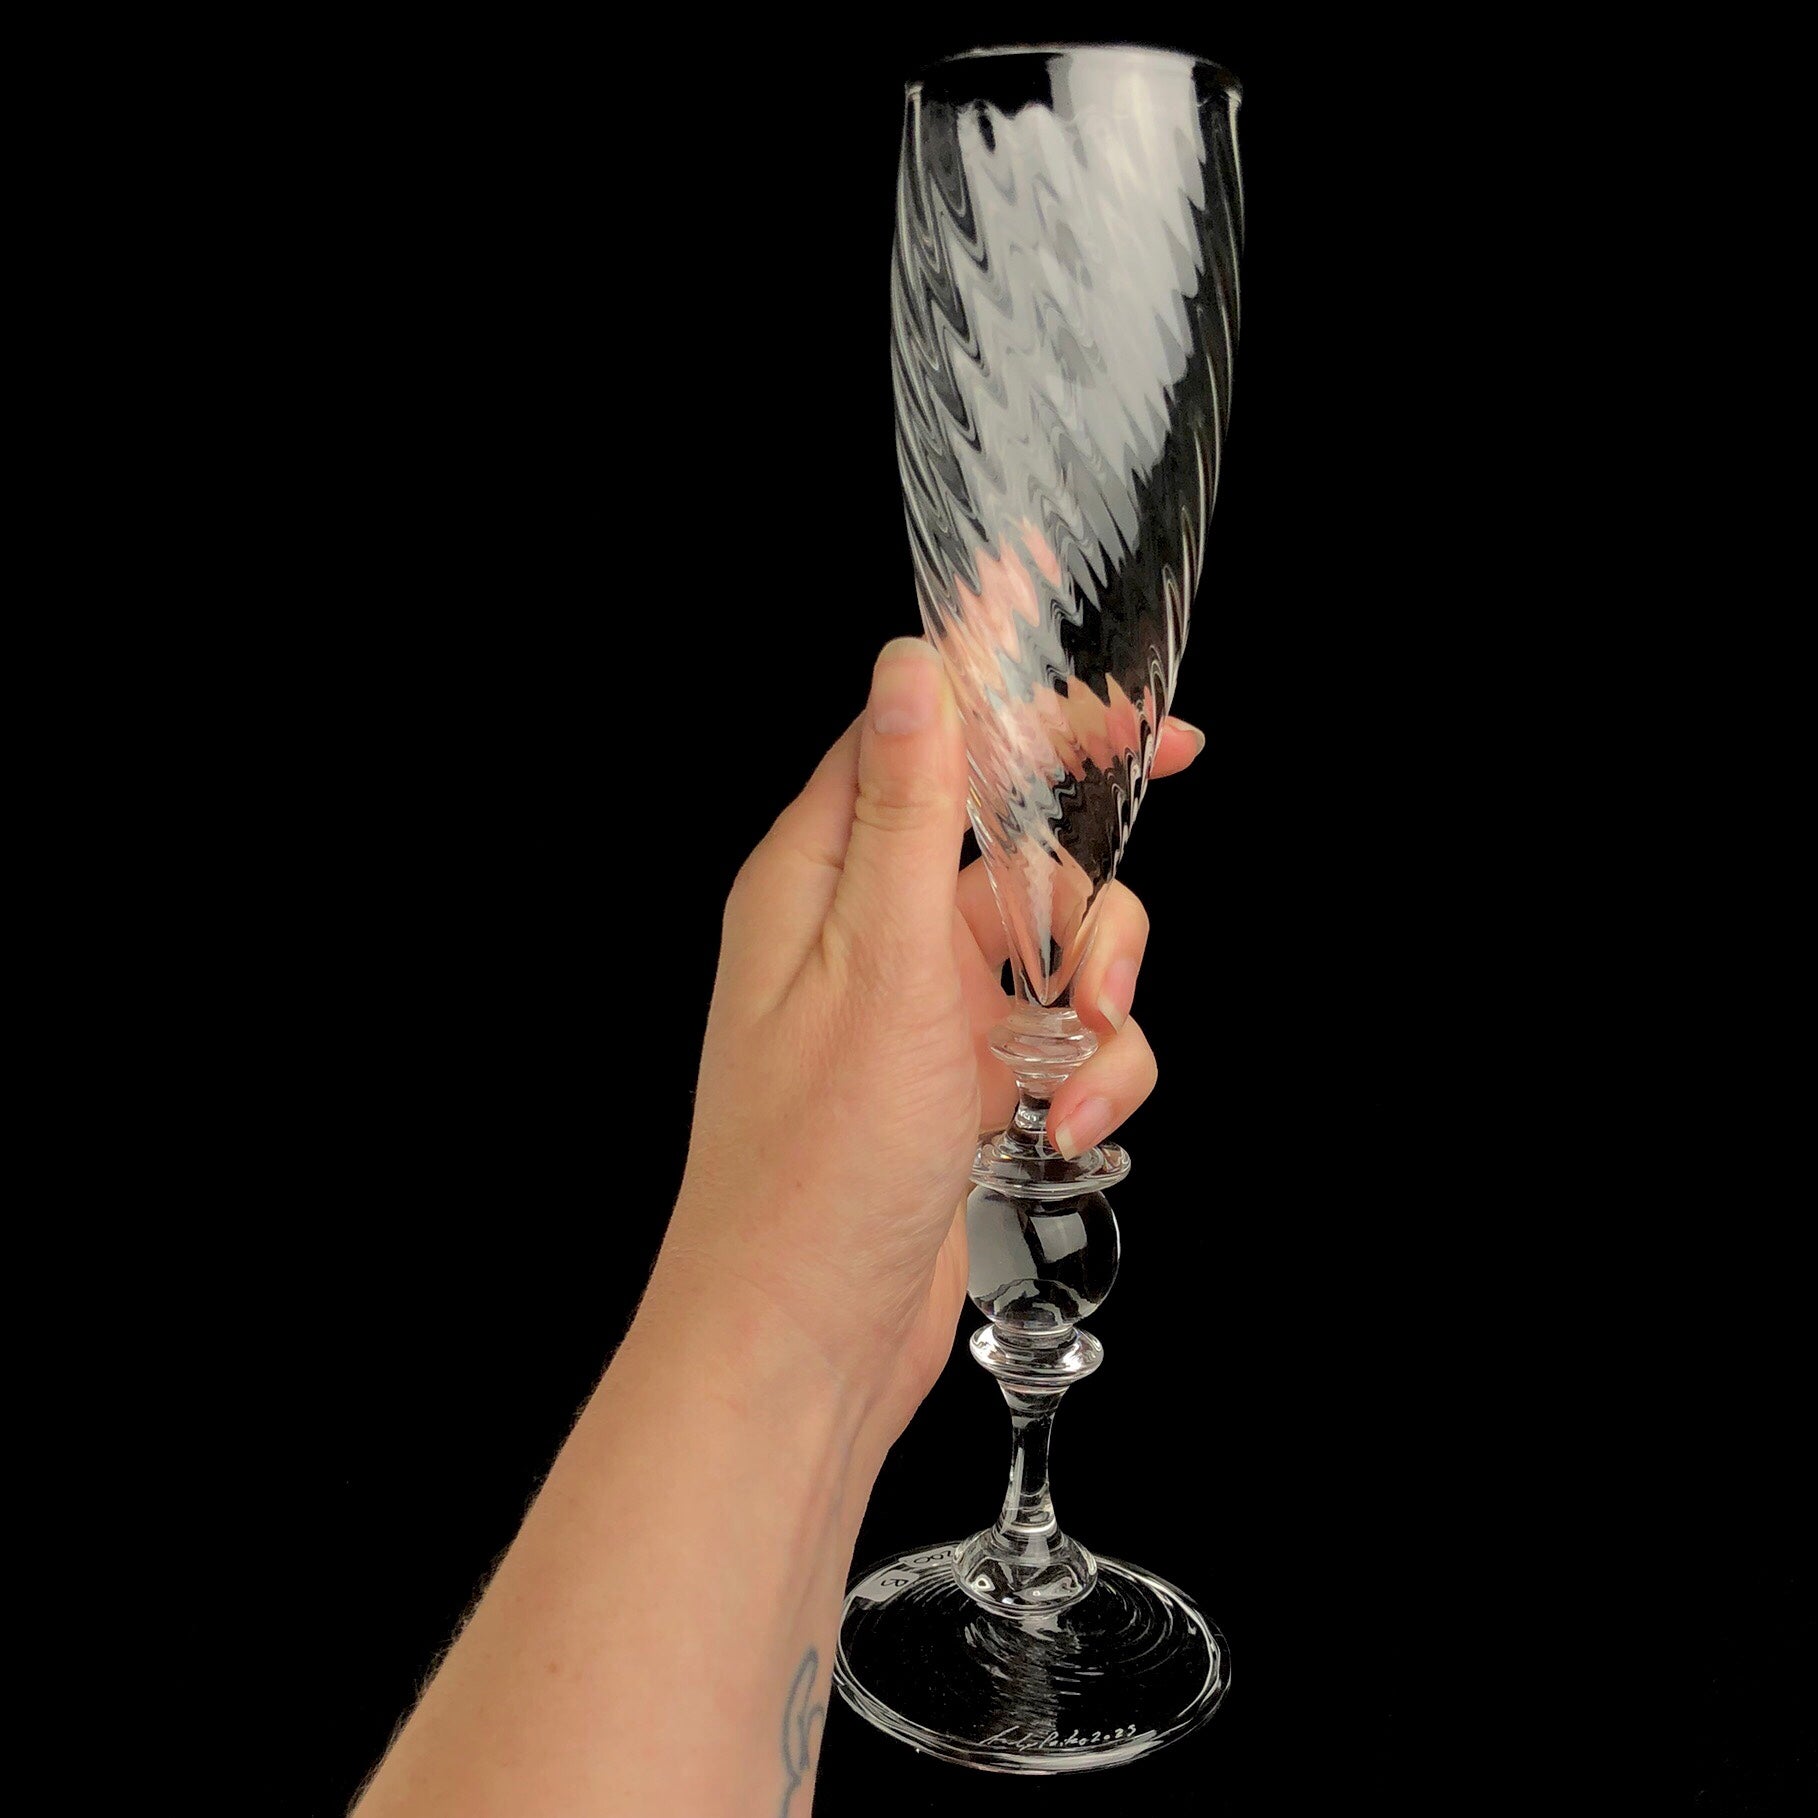 Champagne Flute shown in hand